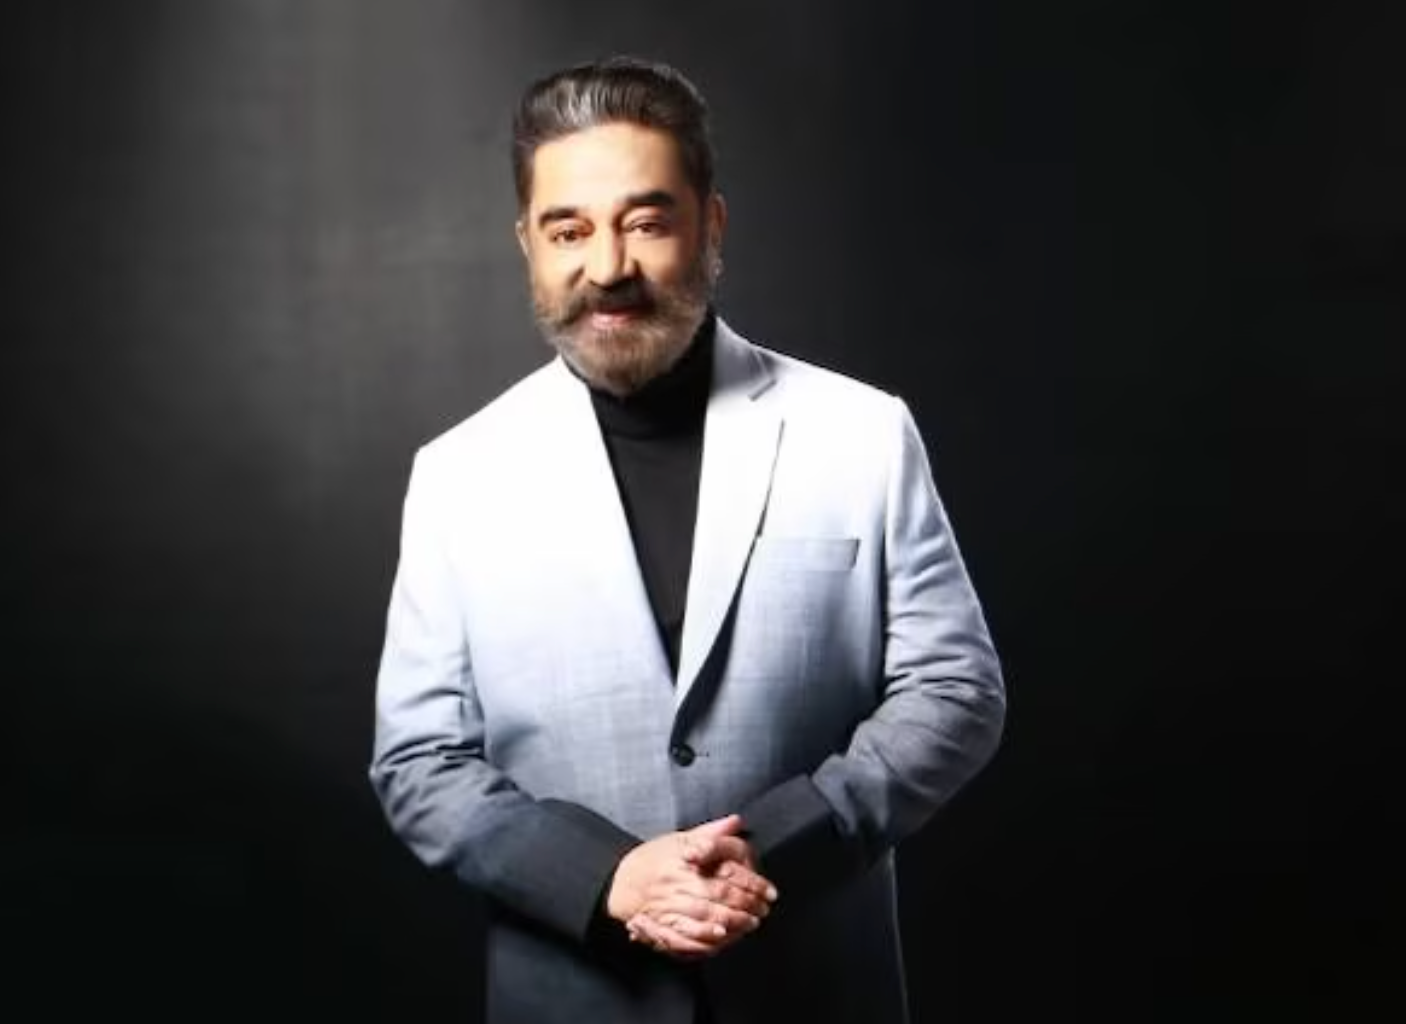 moneycontrol: Kamal Haasan: 'It is our mission and responsibility to build a sustainable future'